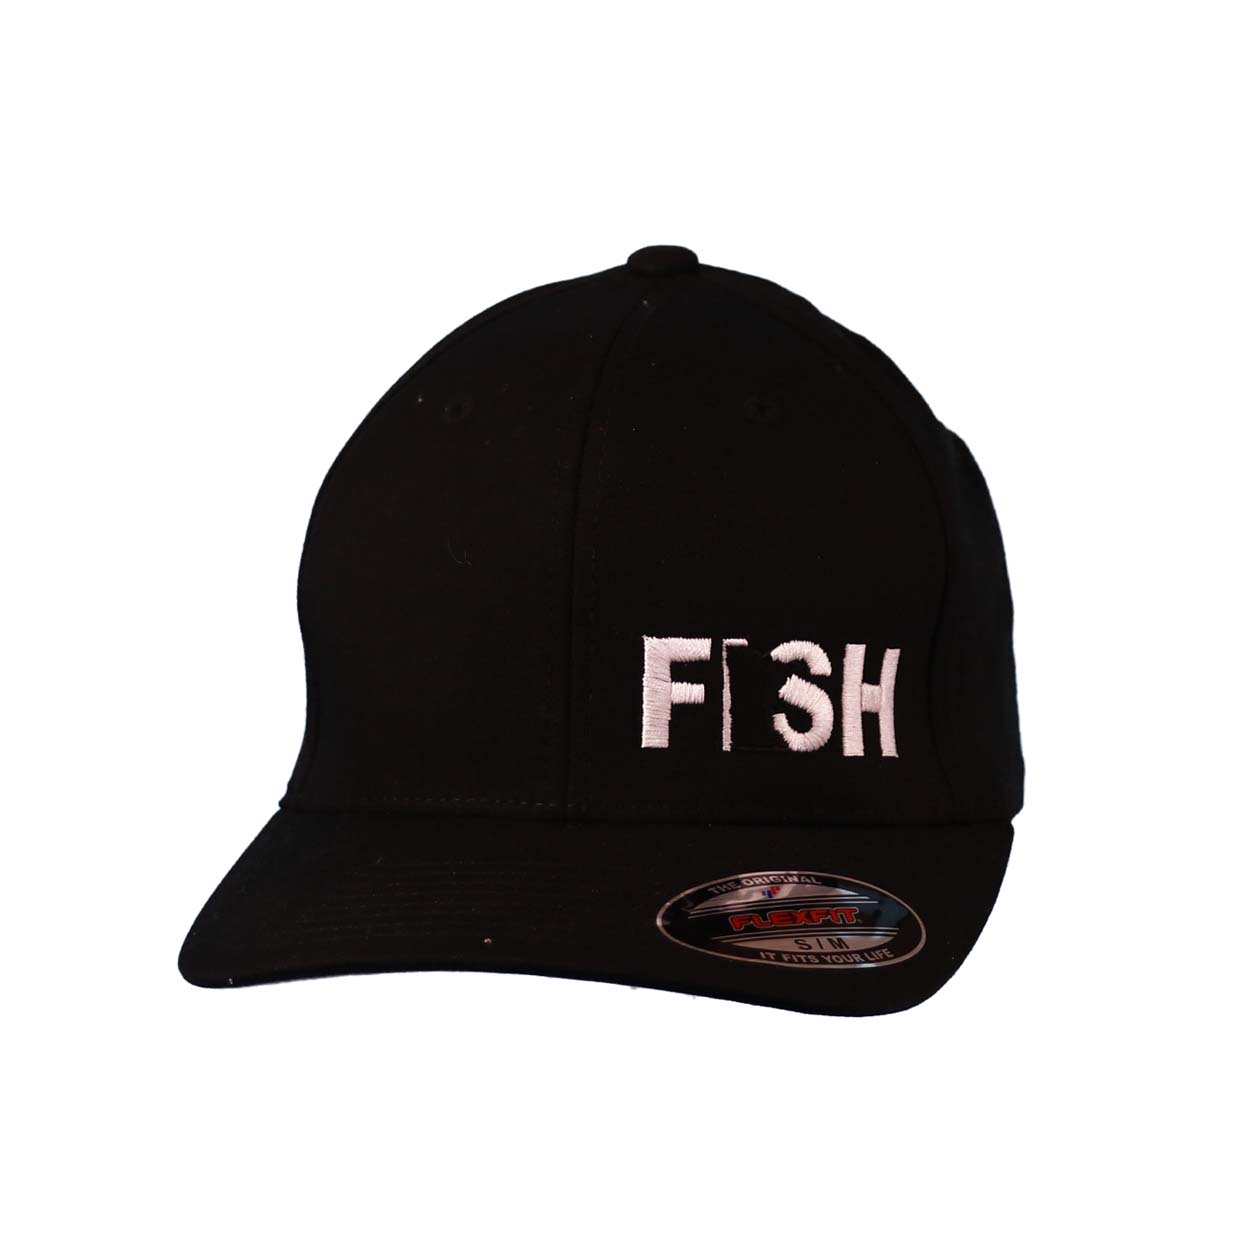 Fish Minnesota Night Out Embroidered Flex Fit Hat Black